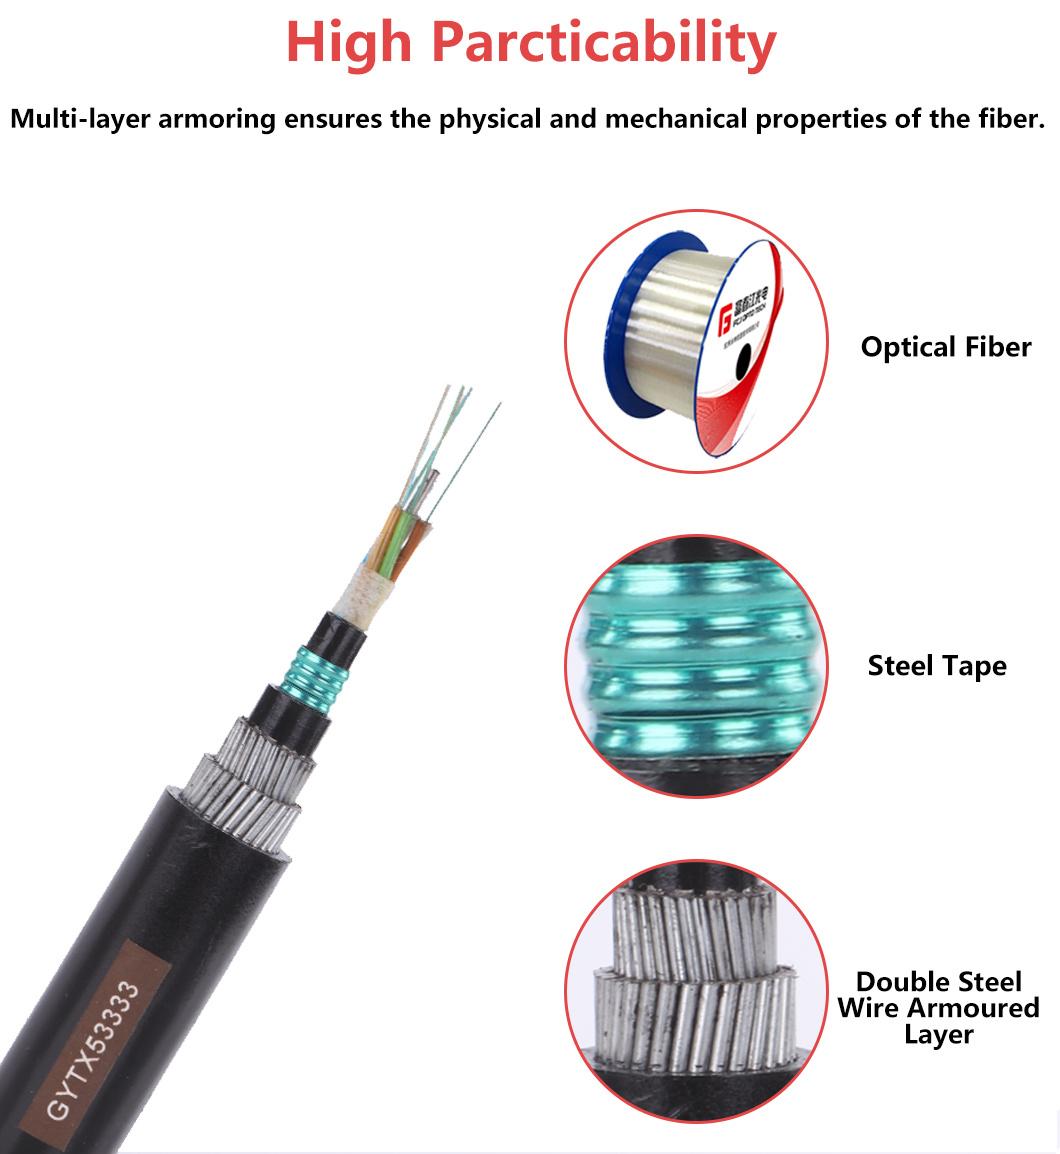 GJFJV Outdoor Fibra Optica 1f 2f 4 Core 657A Aerial Self Supporting FTTH Drop Cable Fiber Optic Cable Gjyxch GJYXFCH with Messenger